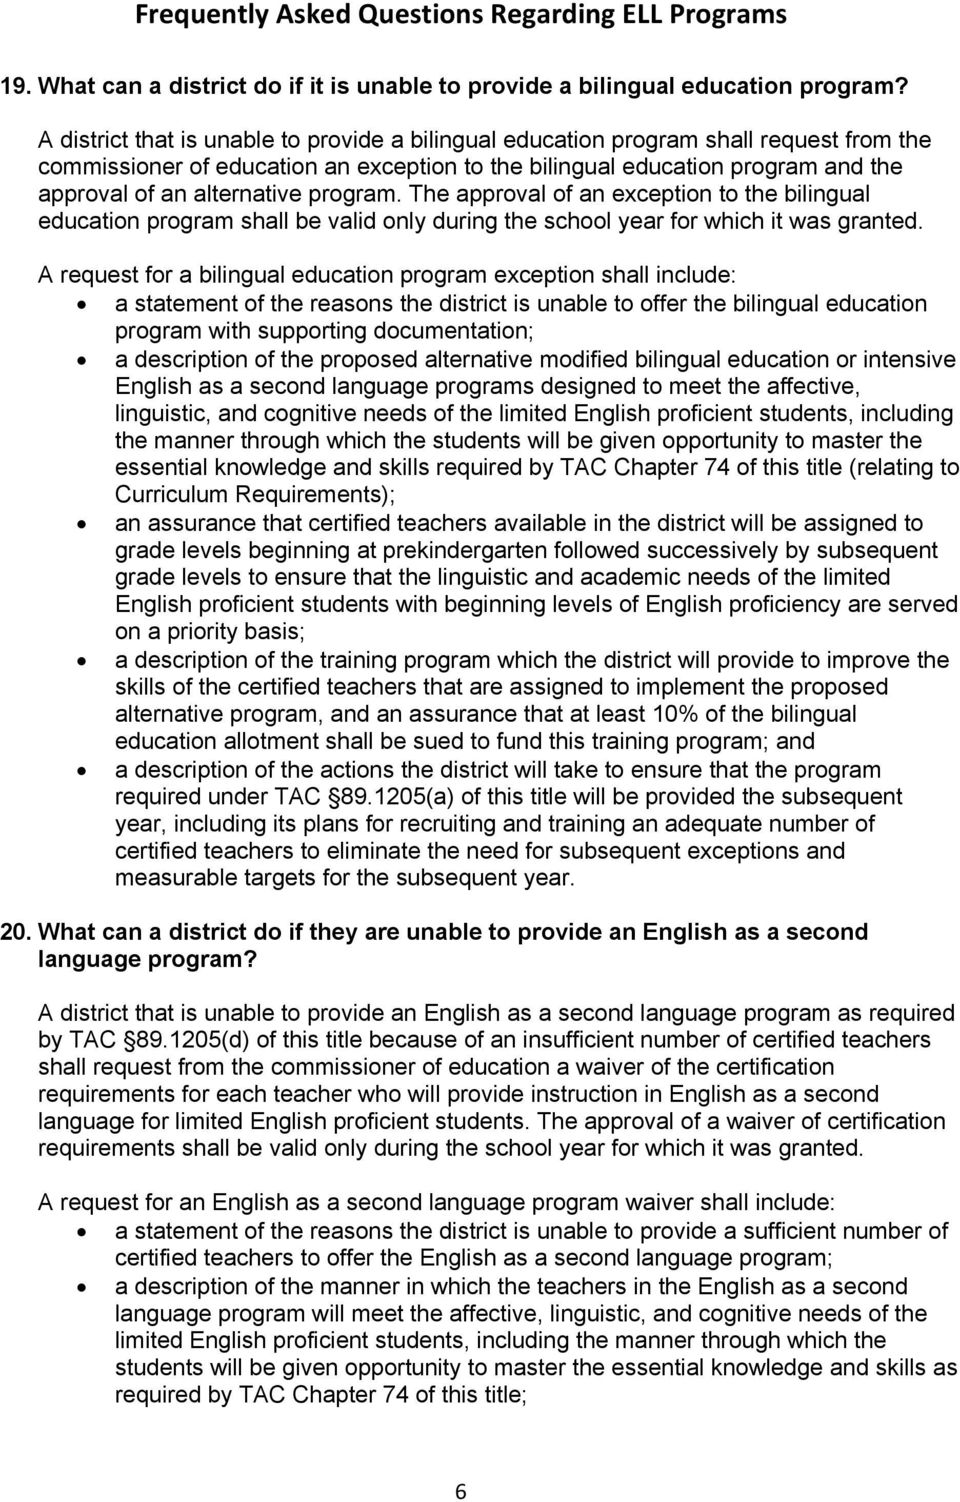 program. The approval of an exception to the bilingual education program shall be valid only during the school year for which it was granted.